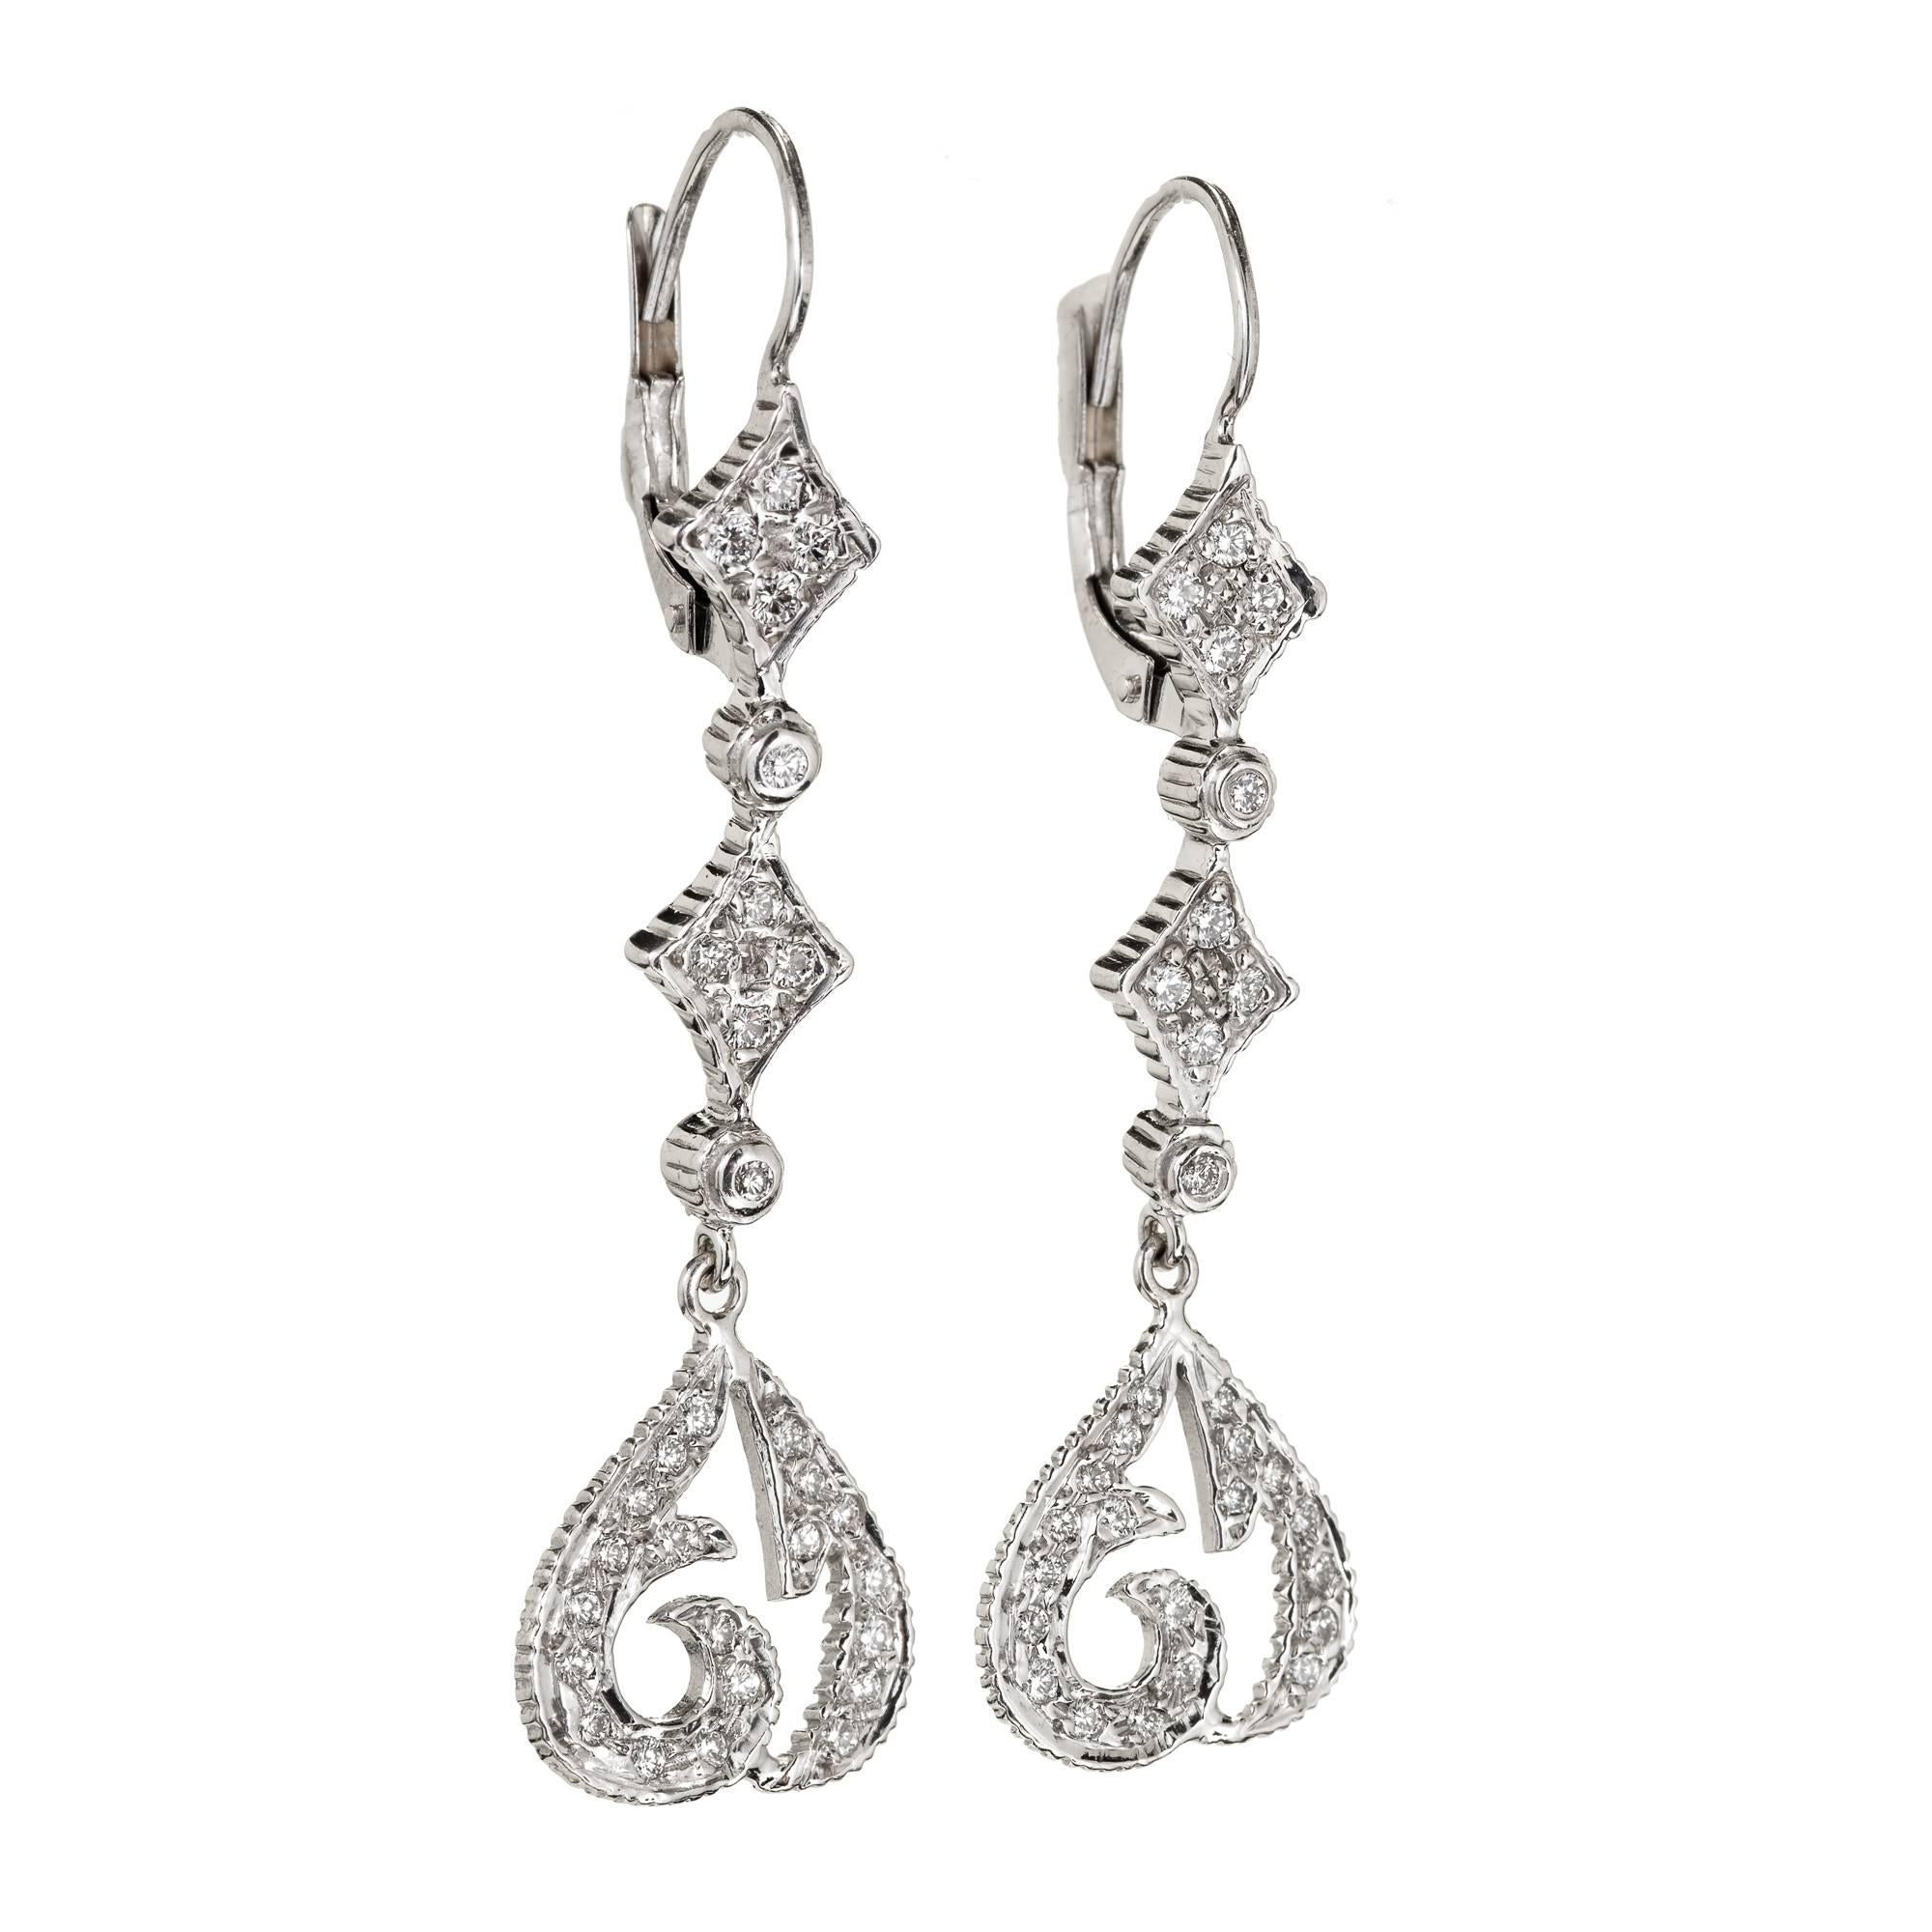 Doris Panos 18k white gold dangle earrings with secure wire tops and a long dramatic design with sparkly diamonds

60 round full cut diamonds, approx. total weight .70cts, F, VS2
18k White Gold
Tested: 18k
Stamped: 750
Hallmark: DP 2004
5.7